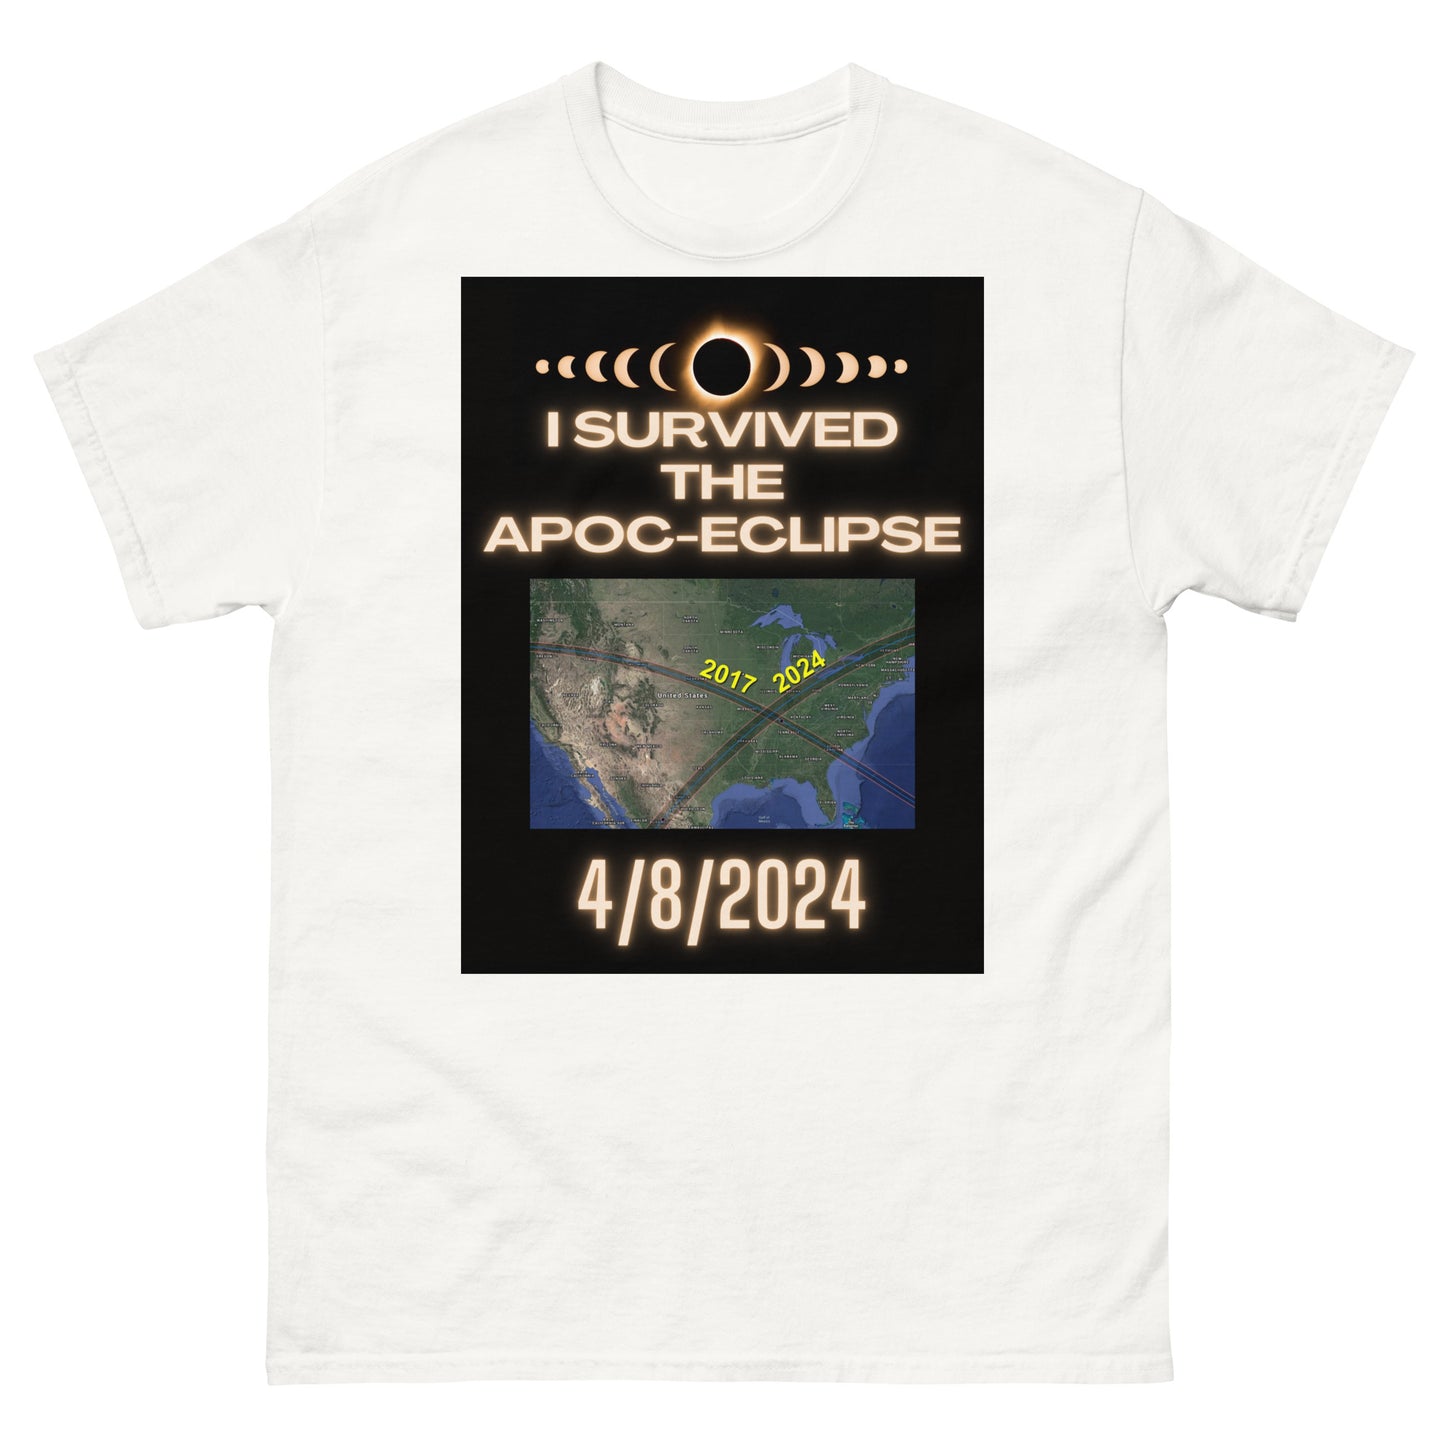 I SURVIVED THE APOC-ECLIPSE 4/8/24 Men's classic tee